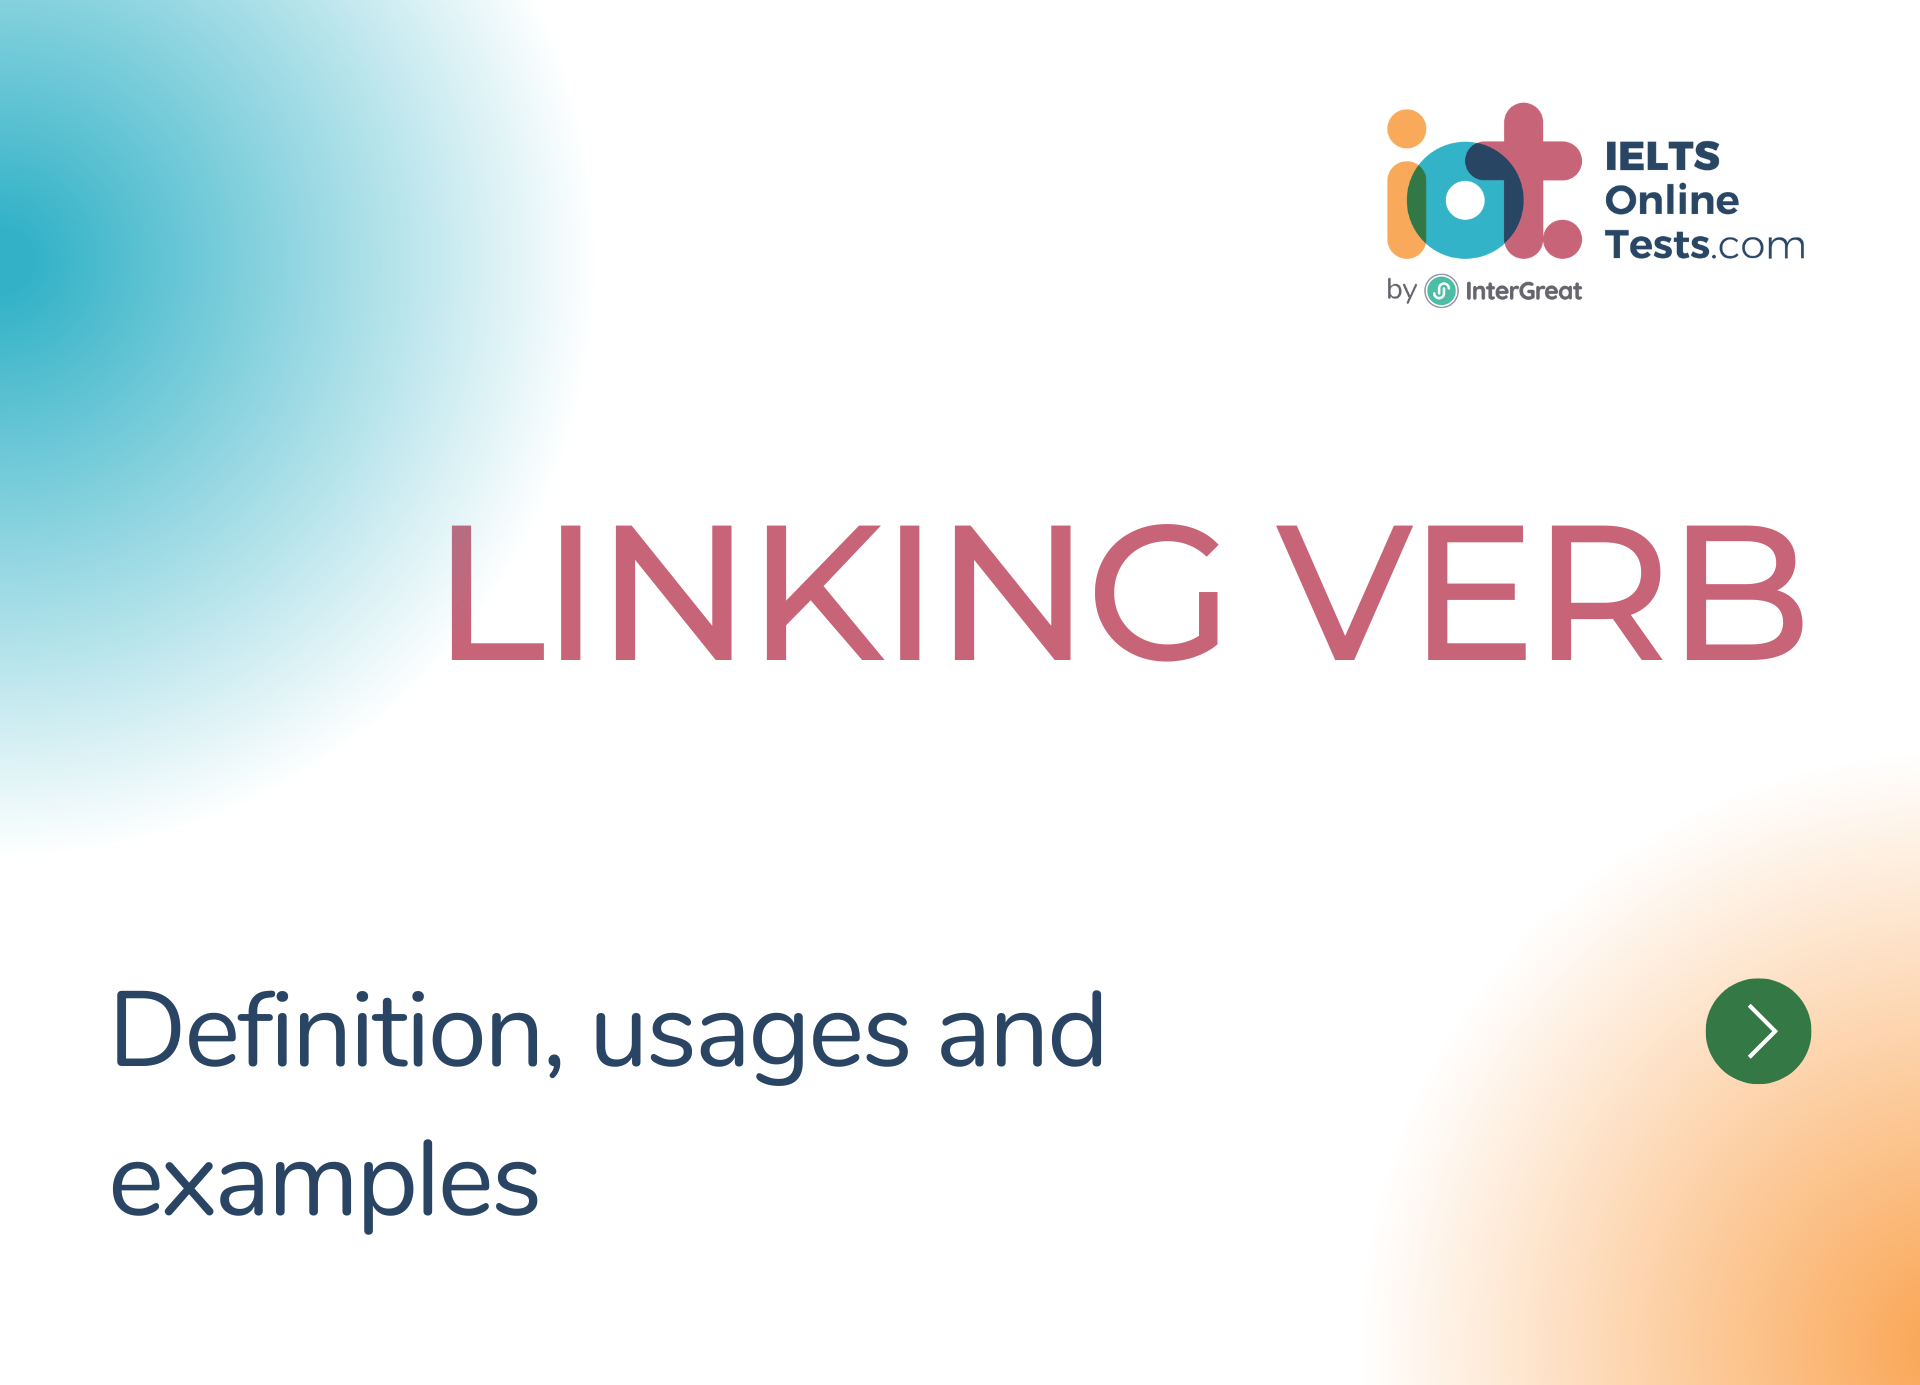 linking-verb-definition-and-examples-ielts-online-tests